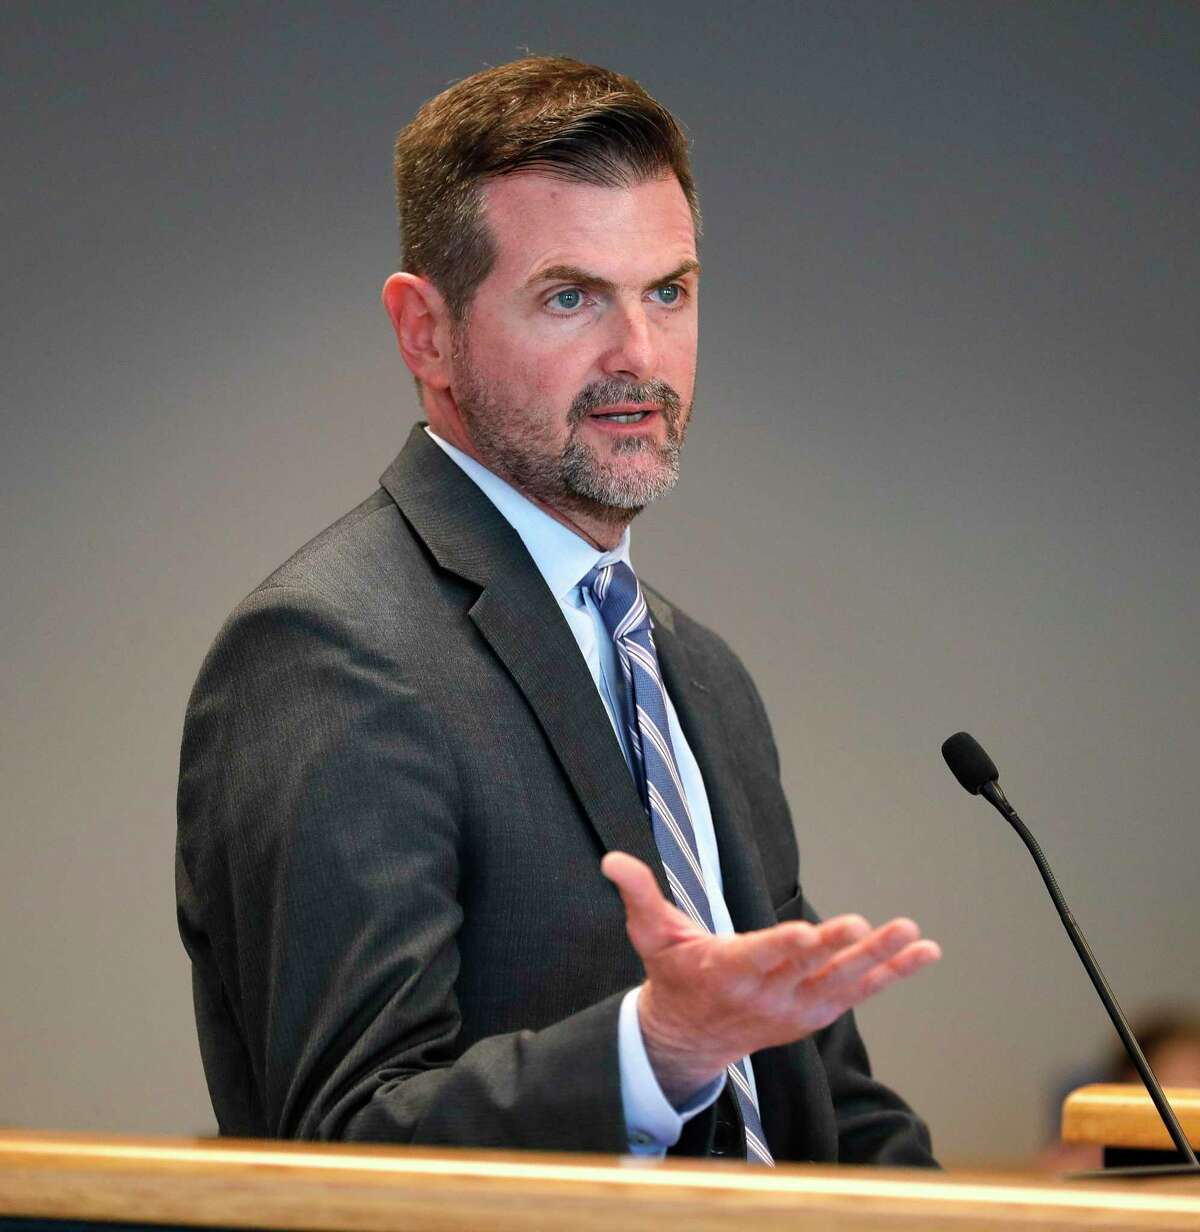 Sen. Brandon Creighton, R-Conroe, speaks during a special session of the Montgomery County Commissioners Court called after county health officials announced the second presumptive positive case of COVID-19, Thursday, March 12, 2020, in Conroe.